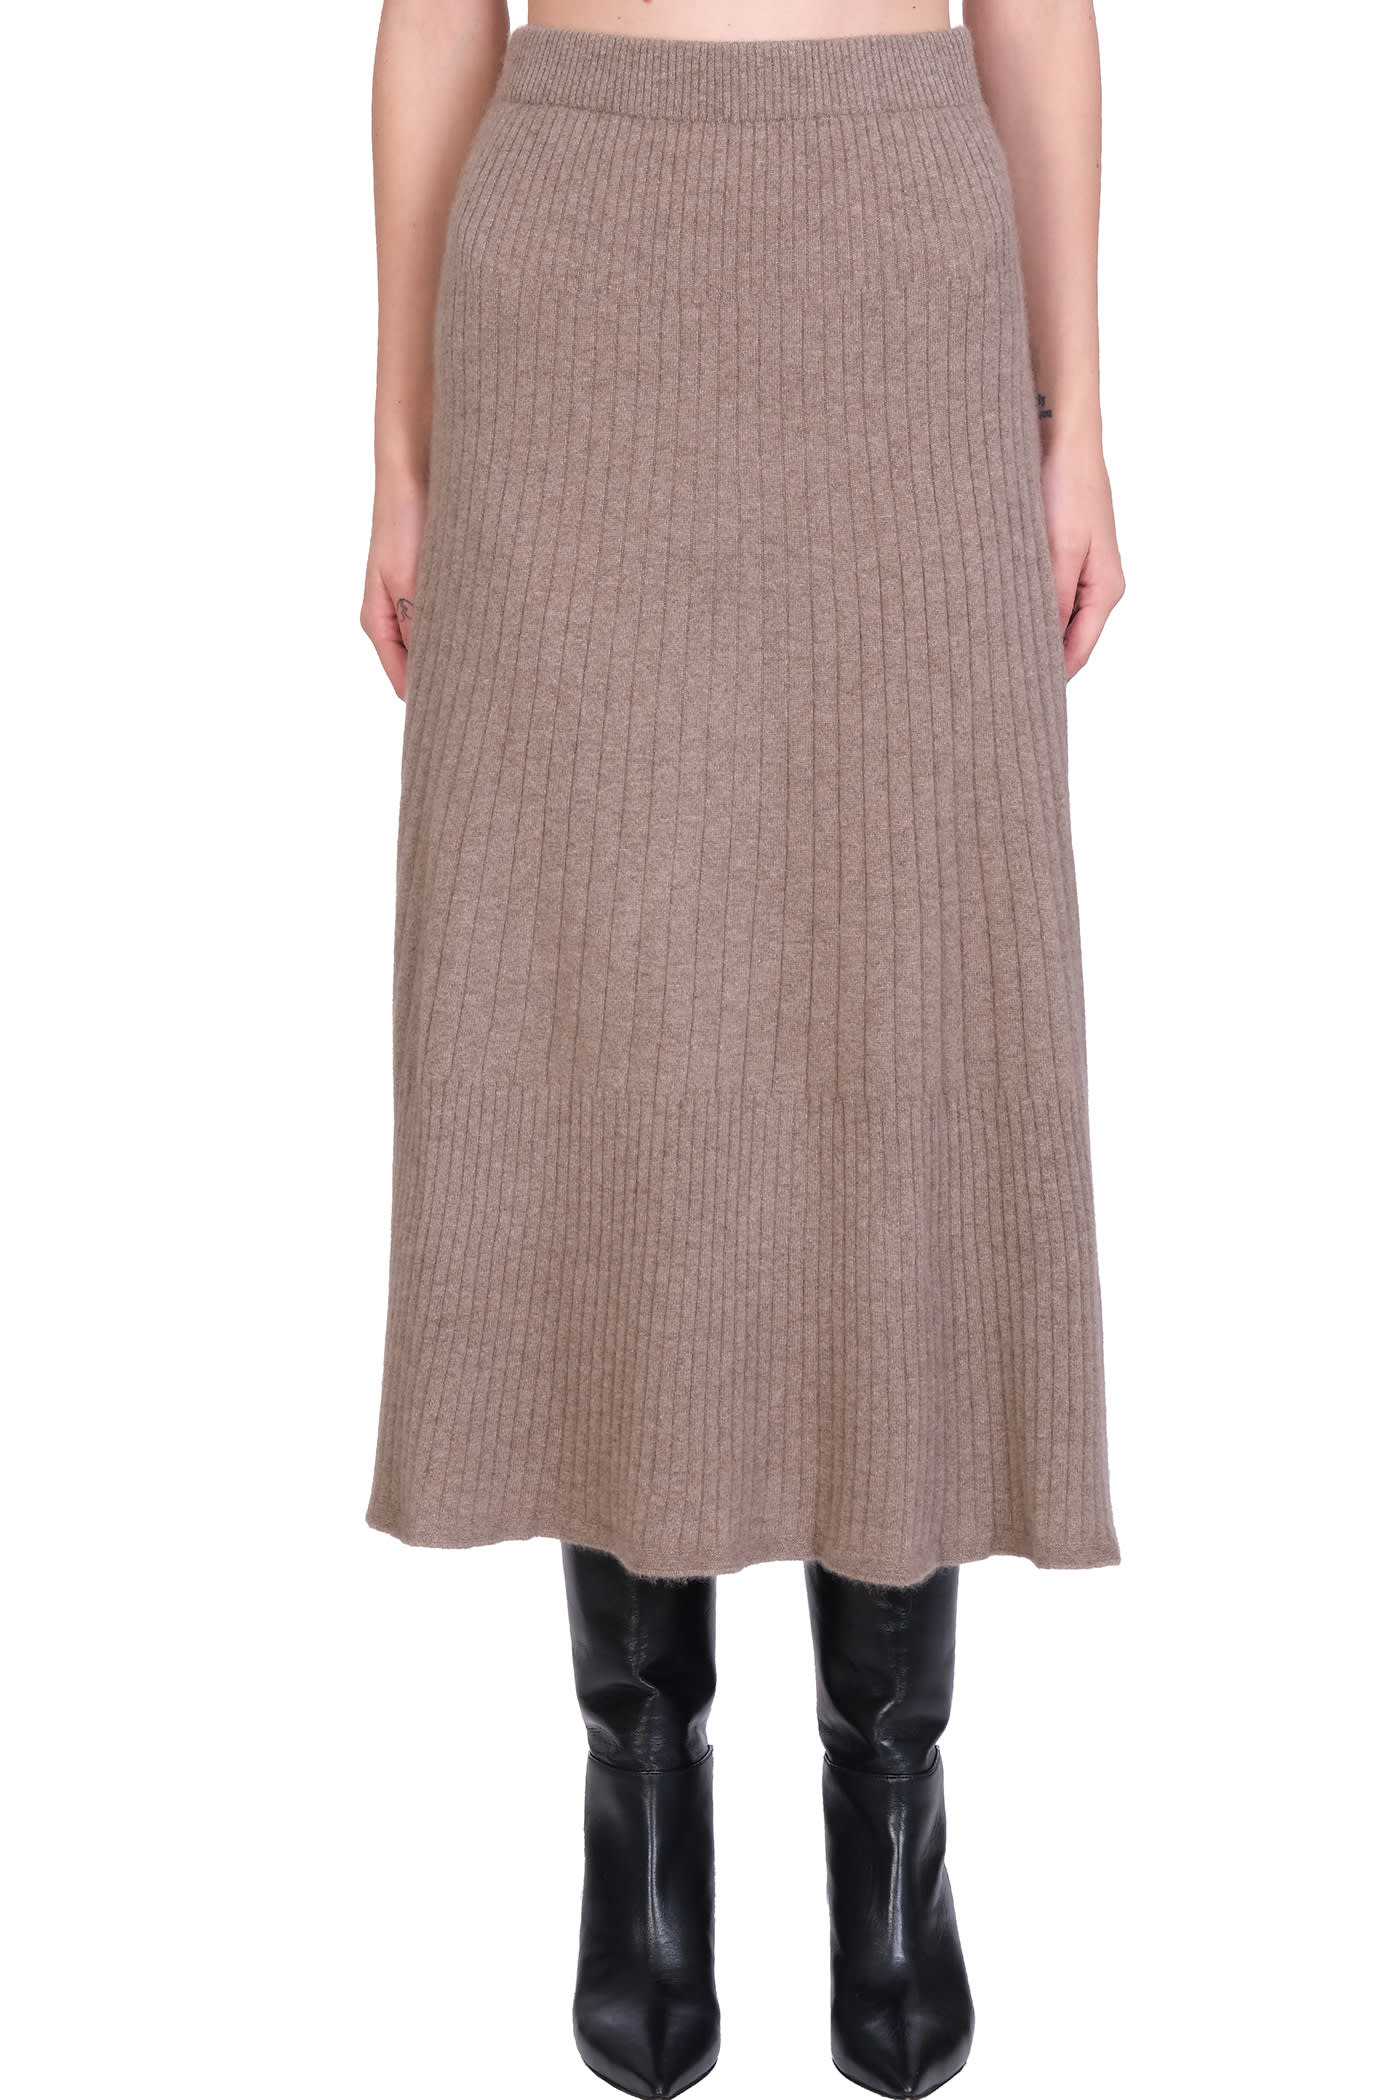 La Ploubel Skirt In Taupe Cashmere